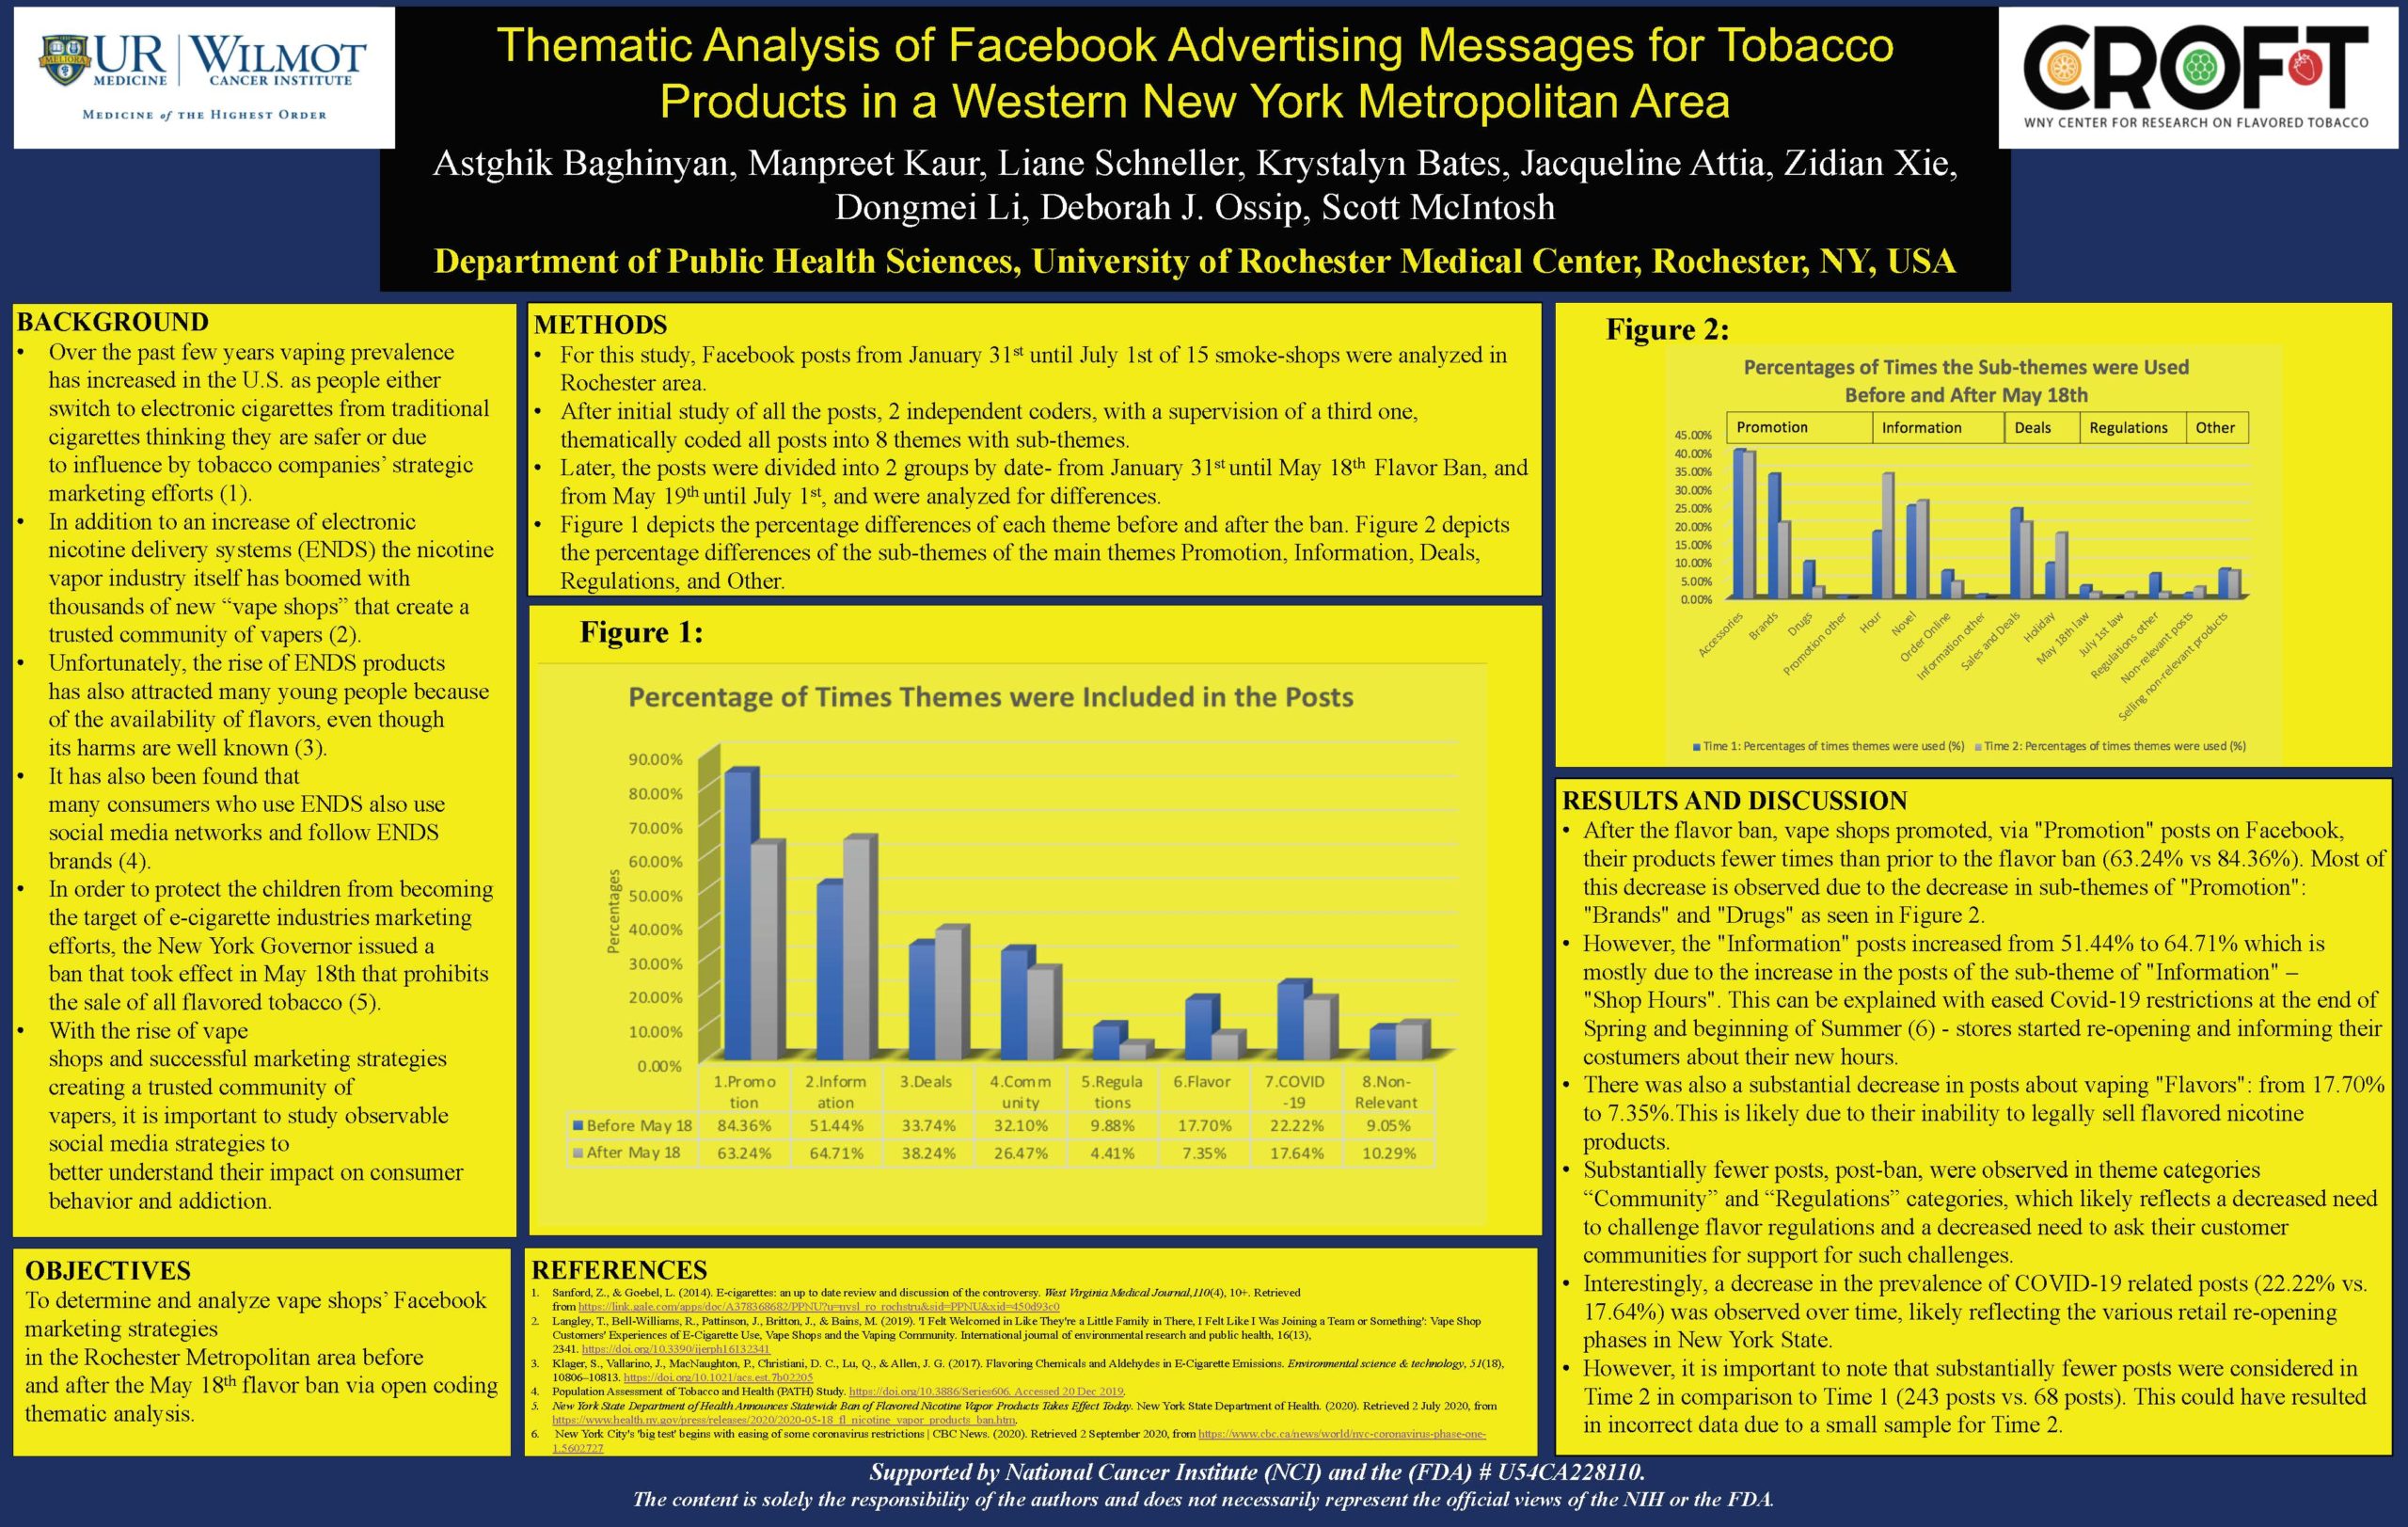 Thematic Analysis of Facebook Advertising Messages for Tobacco Products in a Western New York Metropolitan Area - poster